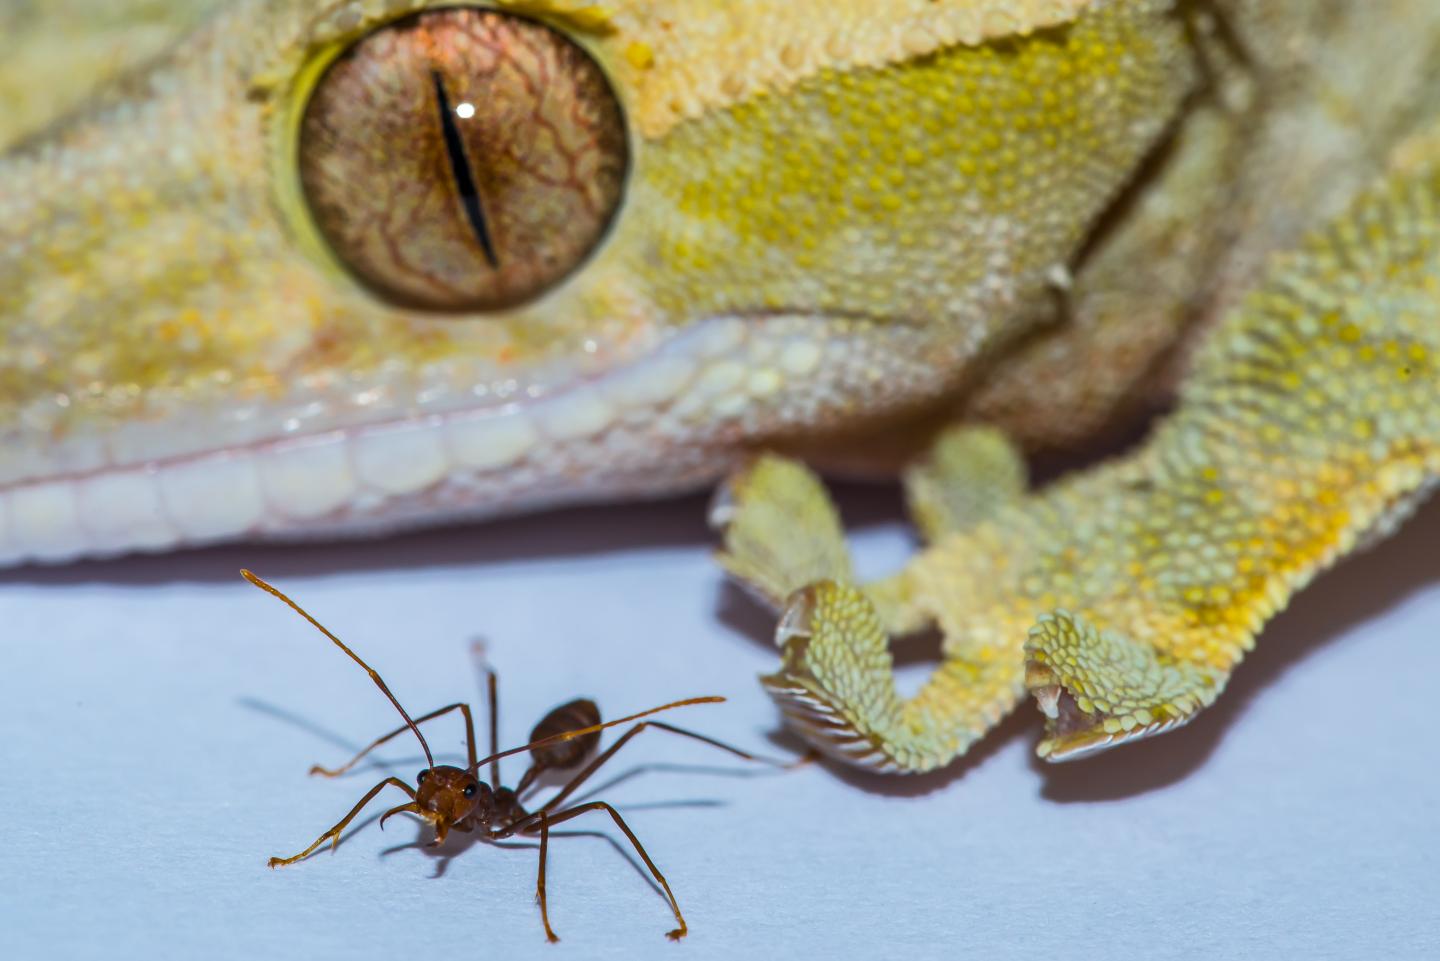  Caption: This image shows a gecko and ant. Credit: Image courtesy of A Hackmann and D Labonte